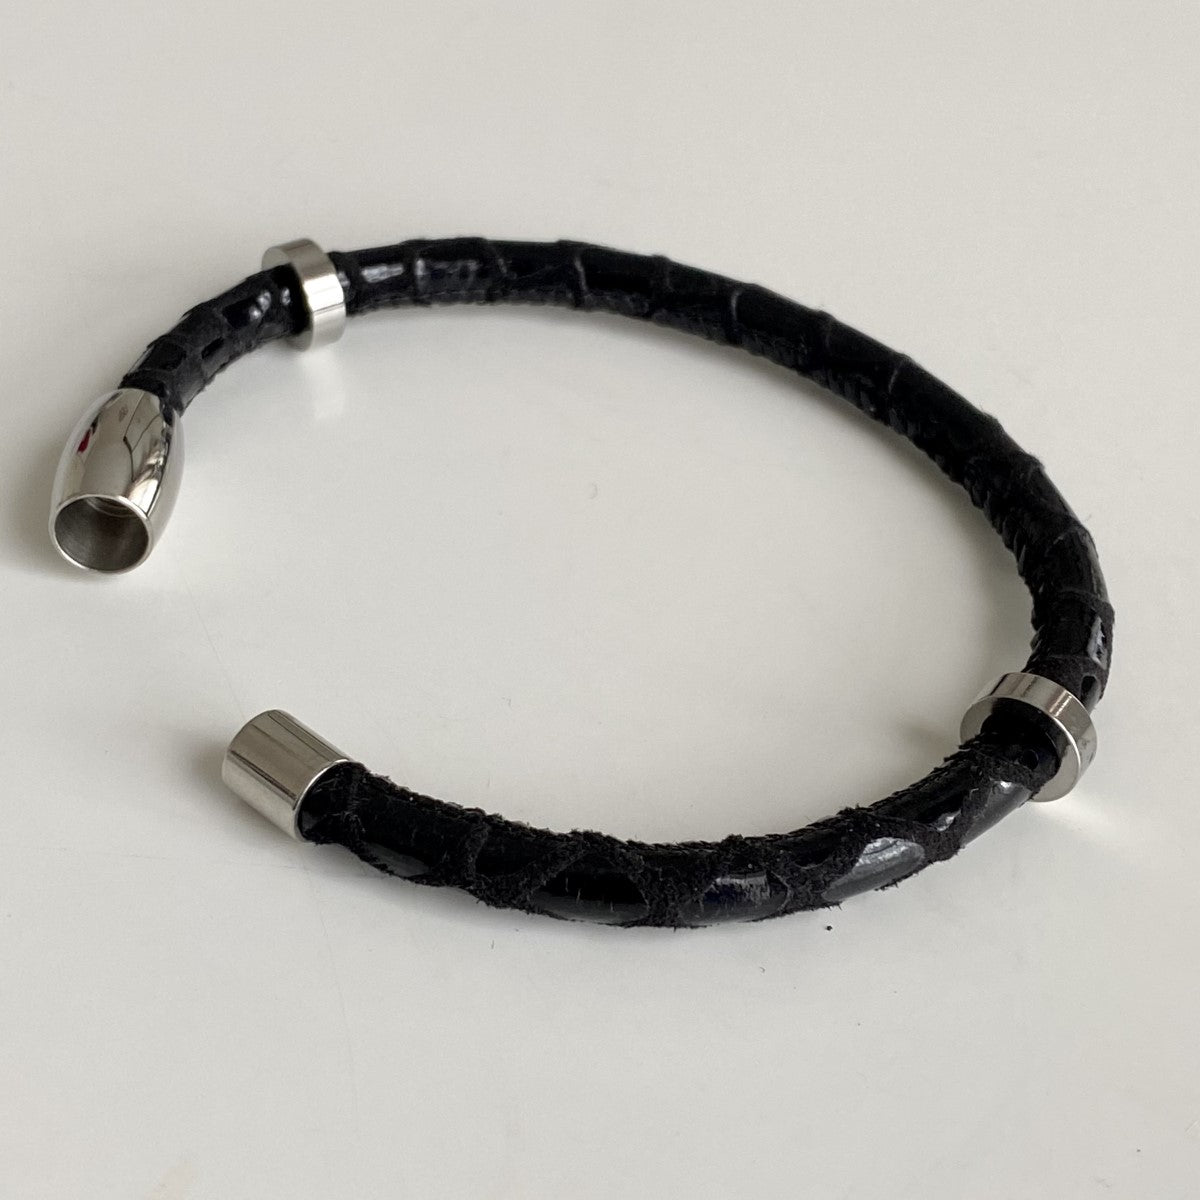 Black Textured Leather Men's Bracelet with a Magnetic Stainless Steel Clasp and Spacers